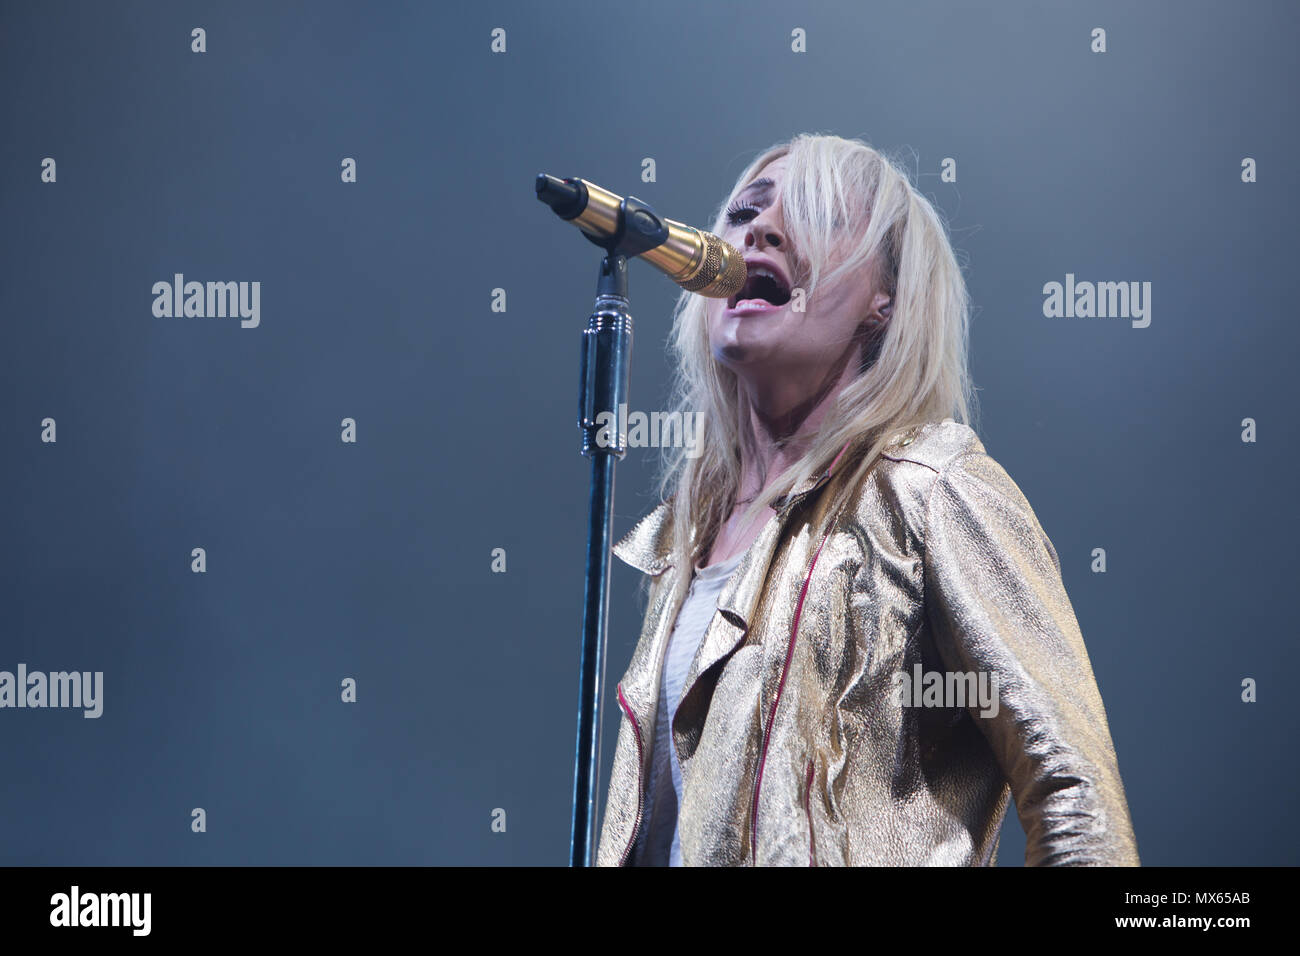 Toronto, CANADA. 02nd June 2018, Emily Haines of Canadian Pop Rock band Metric performas at the 2018 Field Trip Music & Arts Festival in Toronto. Credit: Bobby Singh/Alamay Live News Credit: topconcertphoto/Alamy Live News Stock Photo